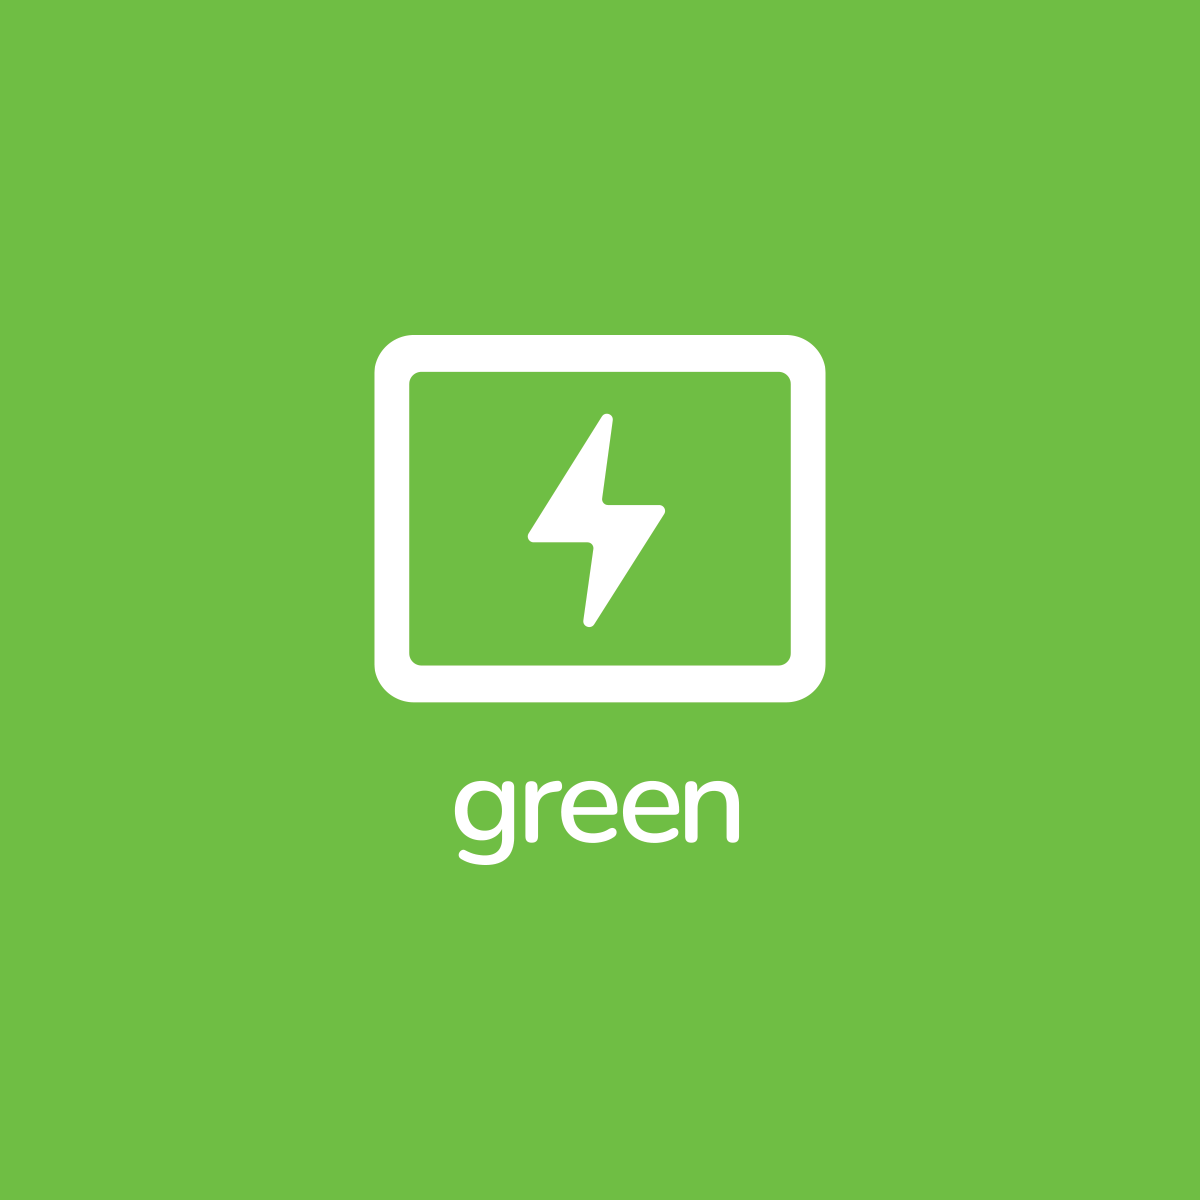 The case for an all-in-one app for sustainable living - A Green Super App